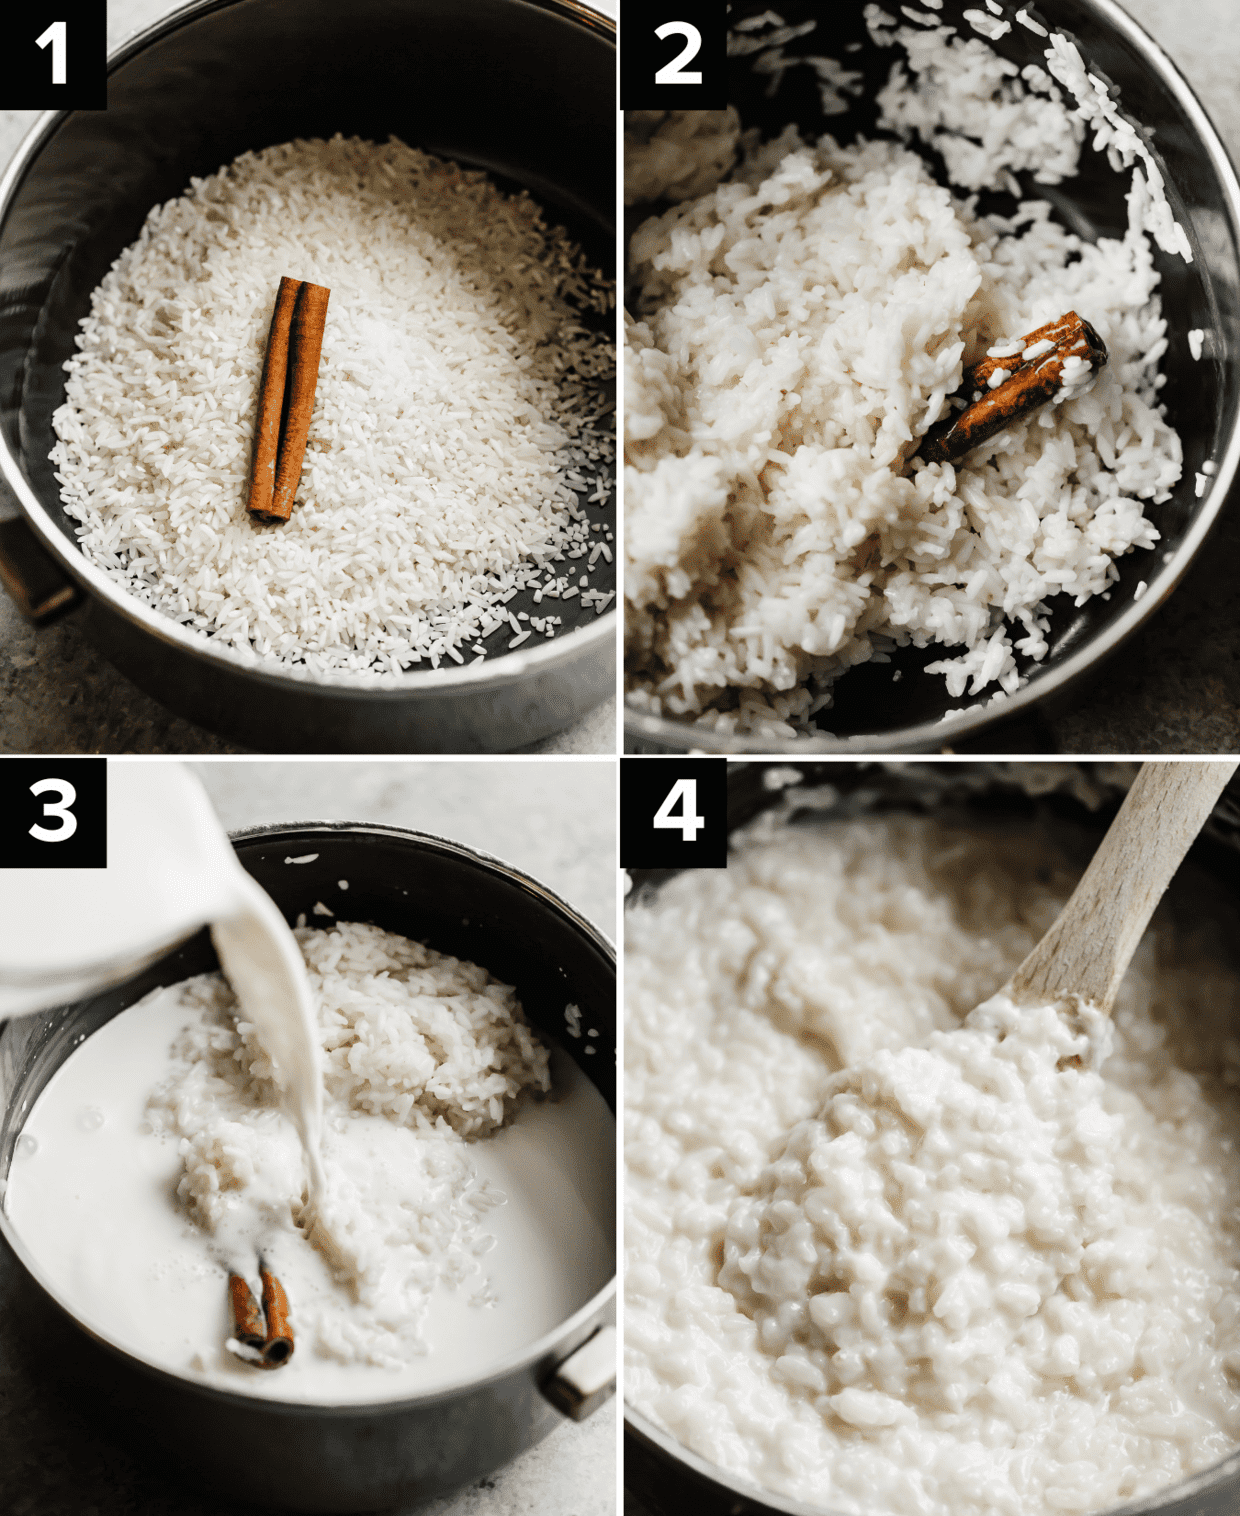 Four images showing how to make Mexican Rice Pudding (Arroz con Leche) in a black pot